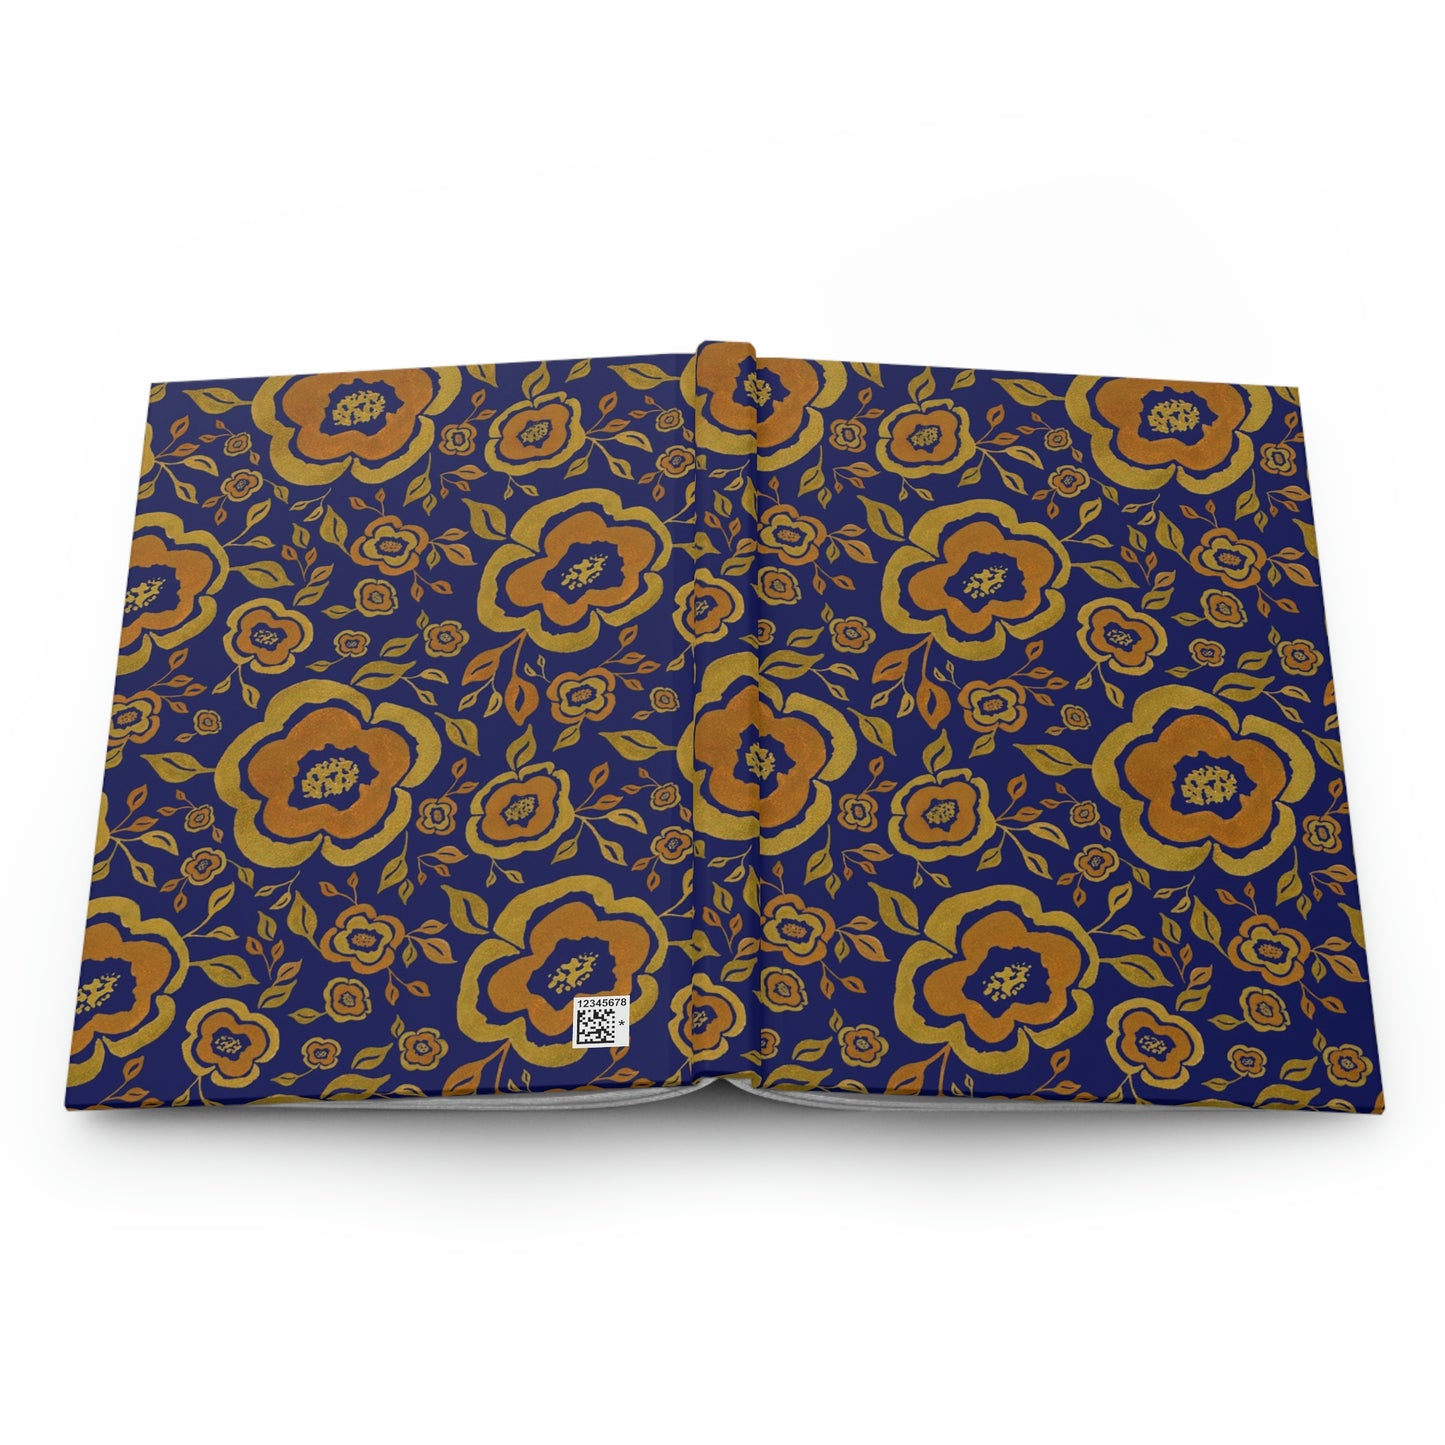 Yoga Journal - Blue with Gold Flowers Hardcover Journal Matte